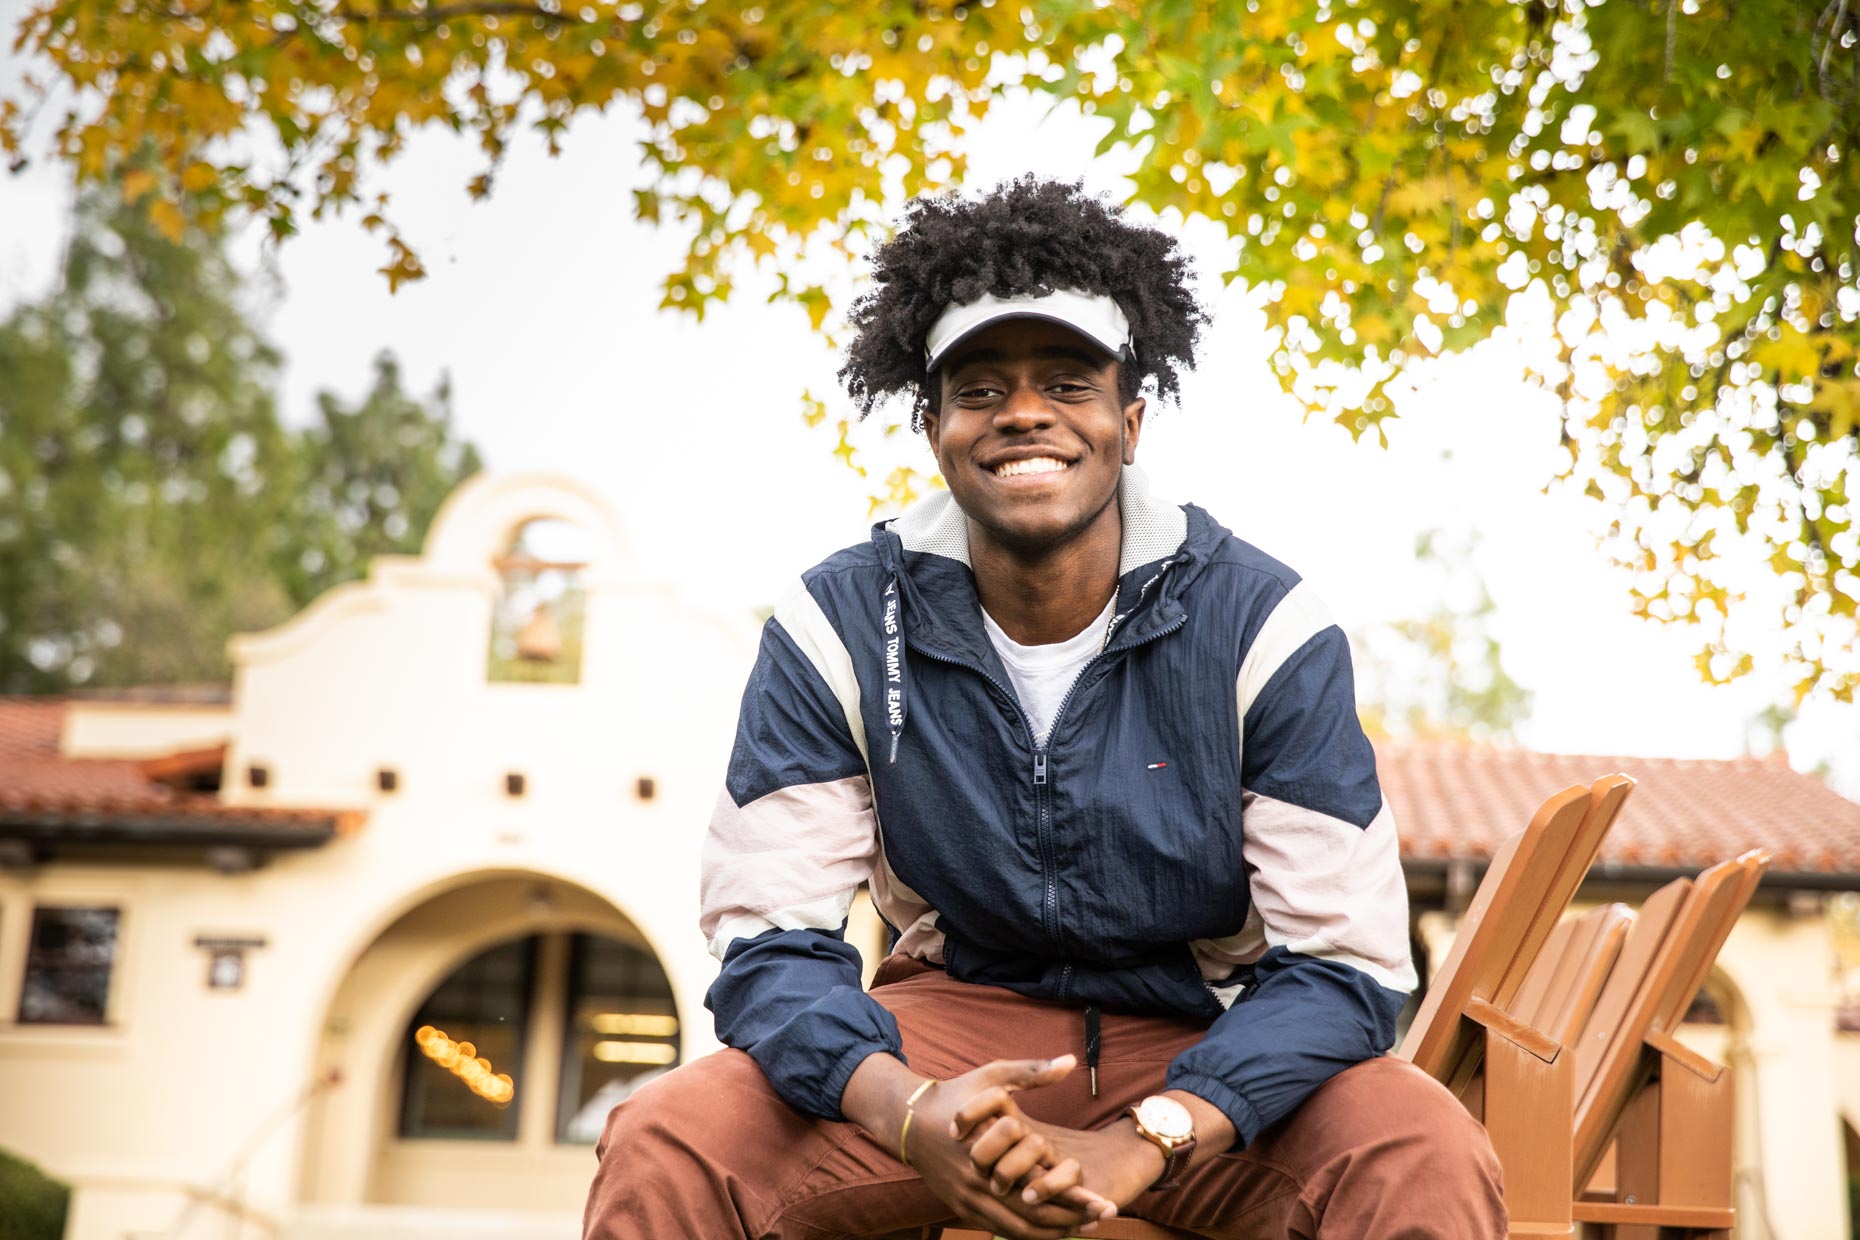 Portrait of smiling African American student with visor.